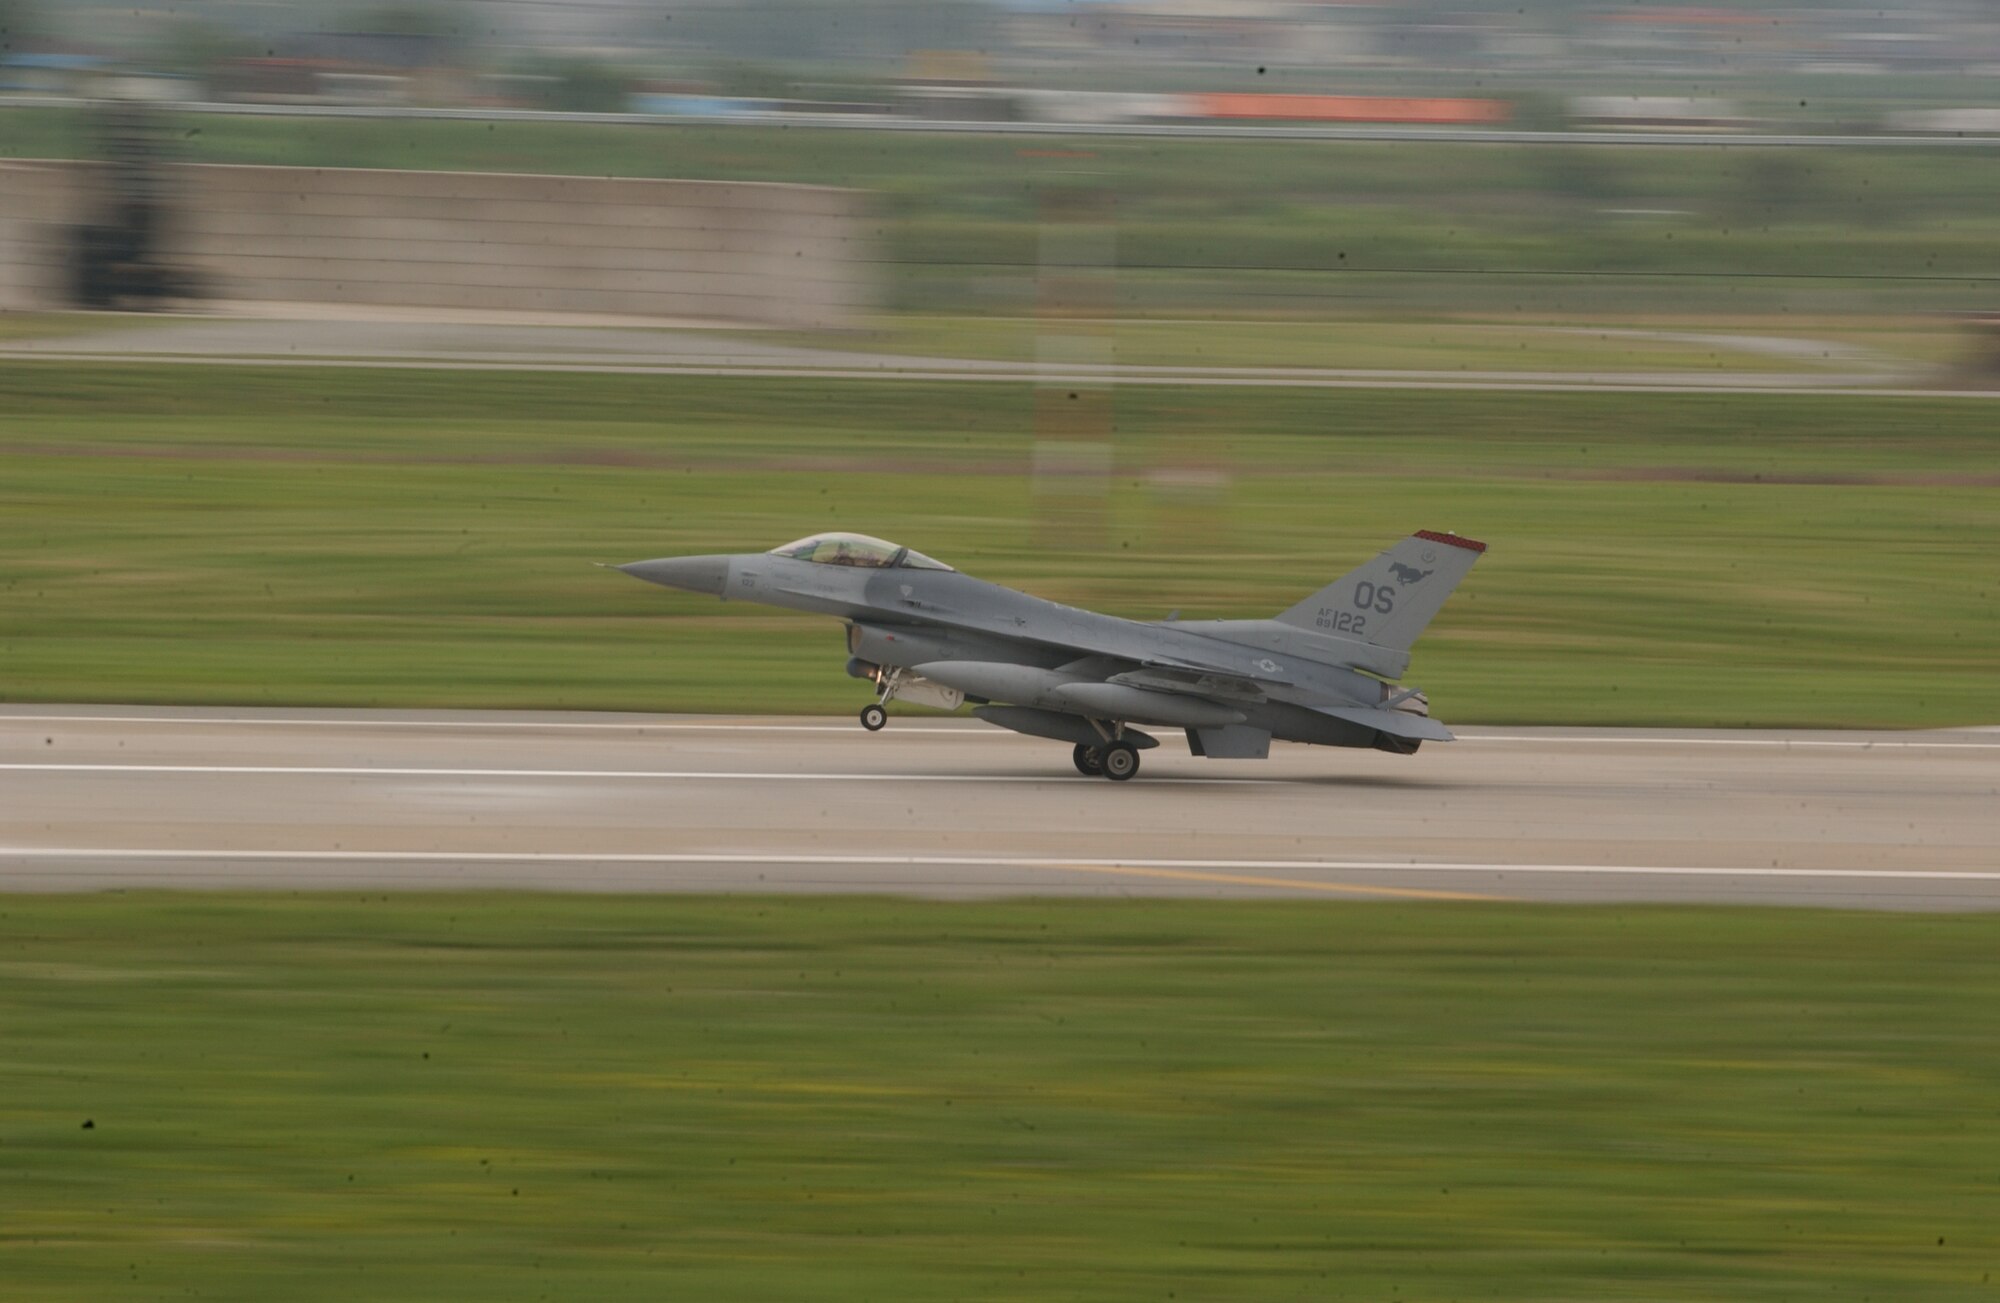 OSAN AIR BASE, Republic of Korea -- An F-16 Fighting Falcon from the 36th Fighter Squadron returns here today after a temporary deployment to Kunsan AB during repairs and maintenance to the air field. (U.S. Air Force photo by Airman Jason Epley)